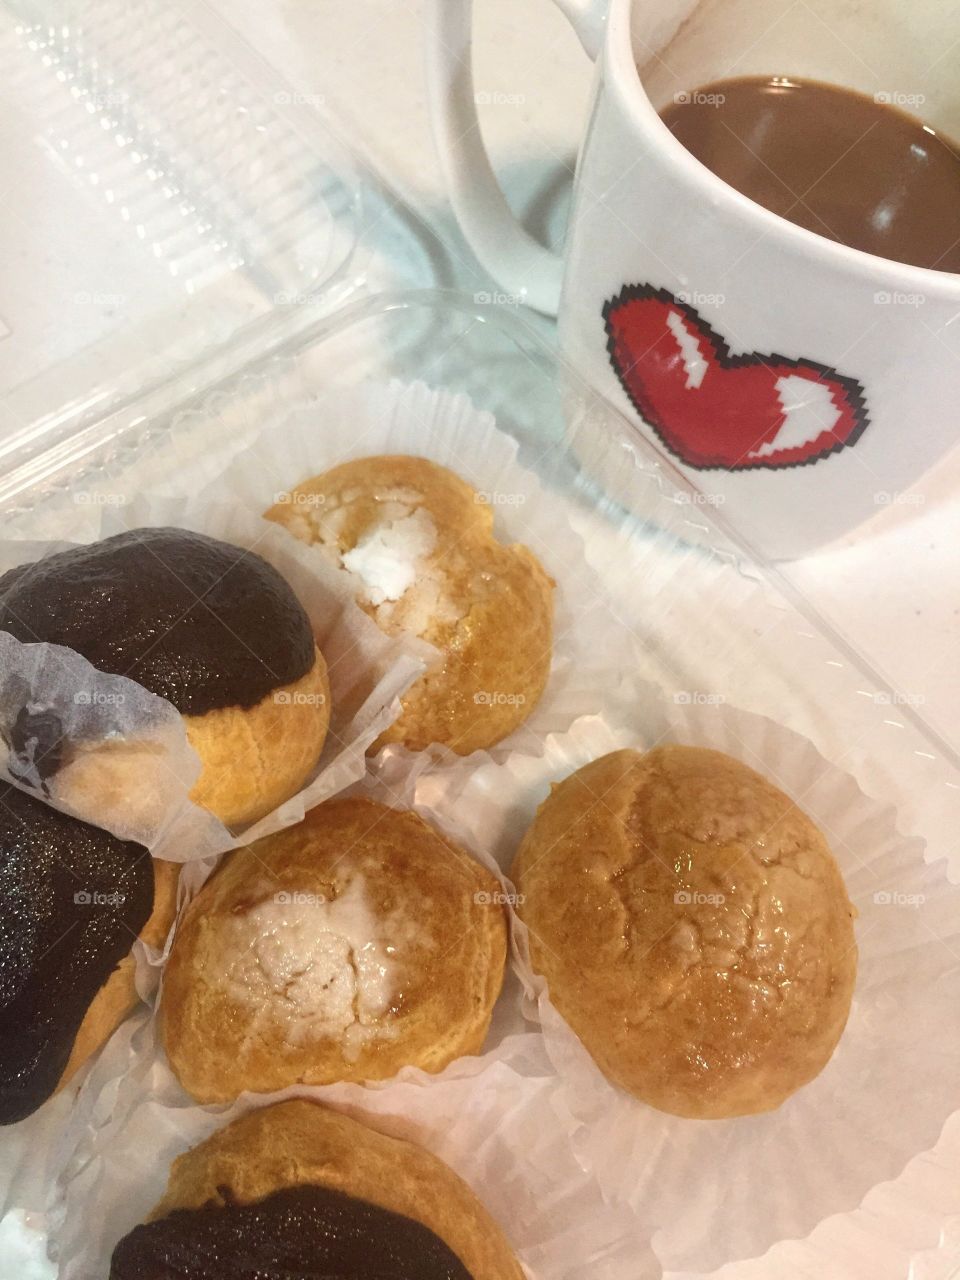 Chocolate glazed and sugar-dusted mini cream puffs paired with coffee.